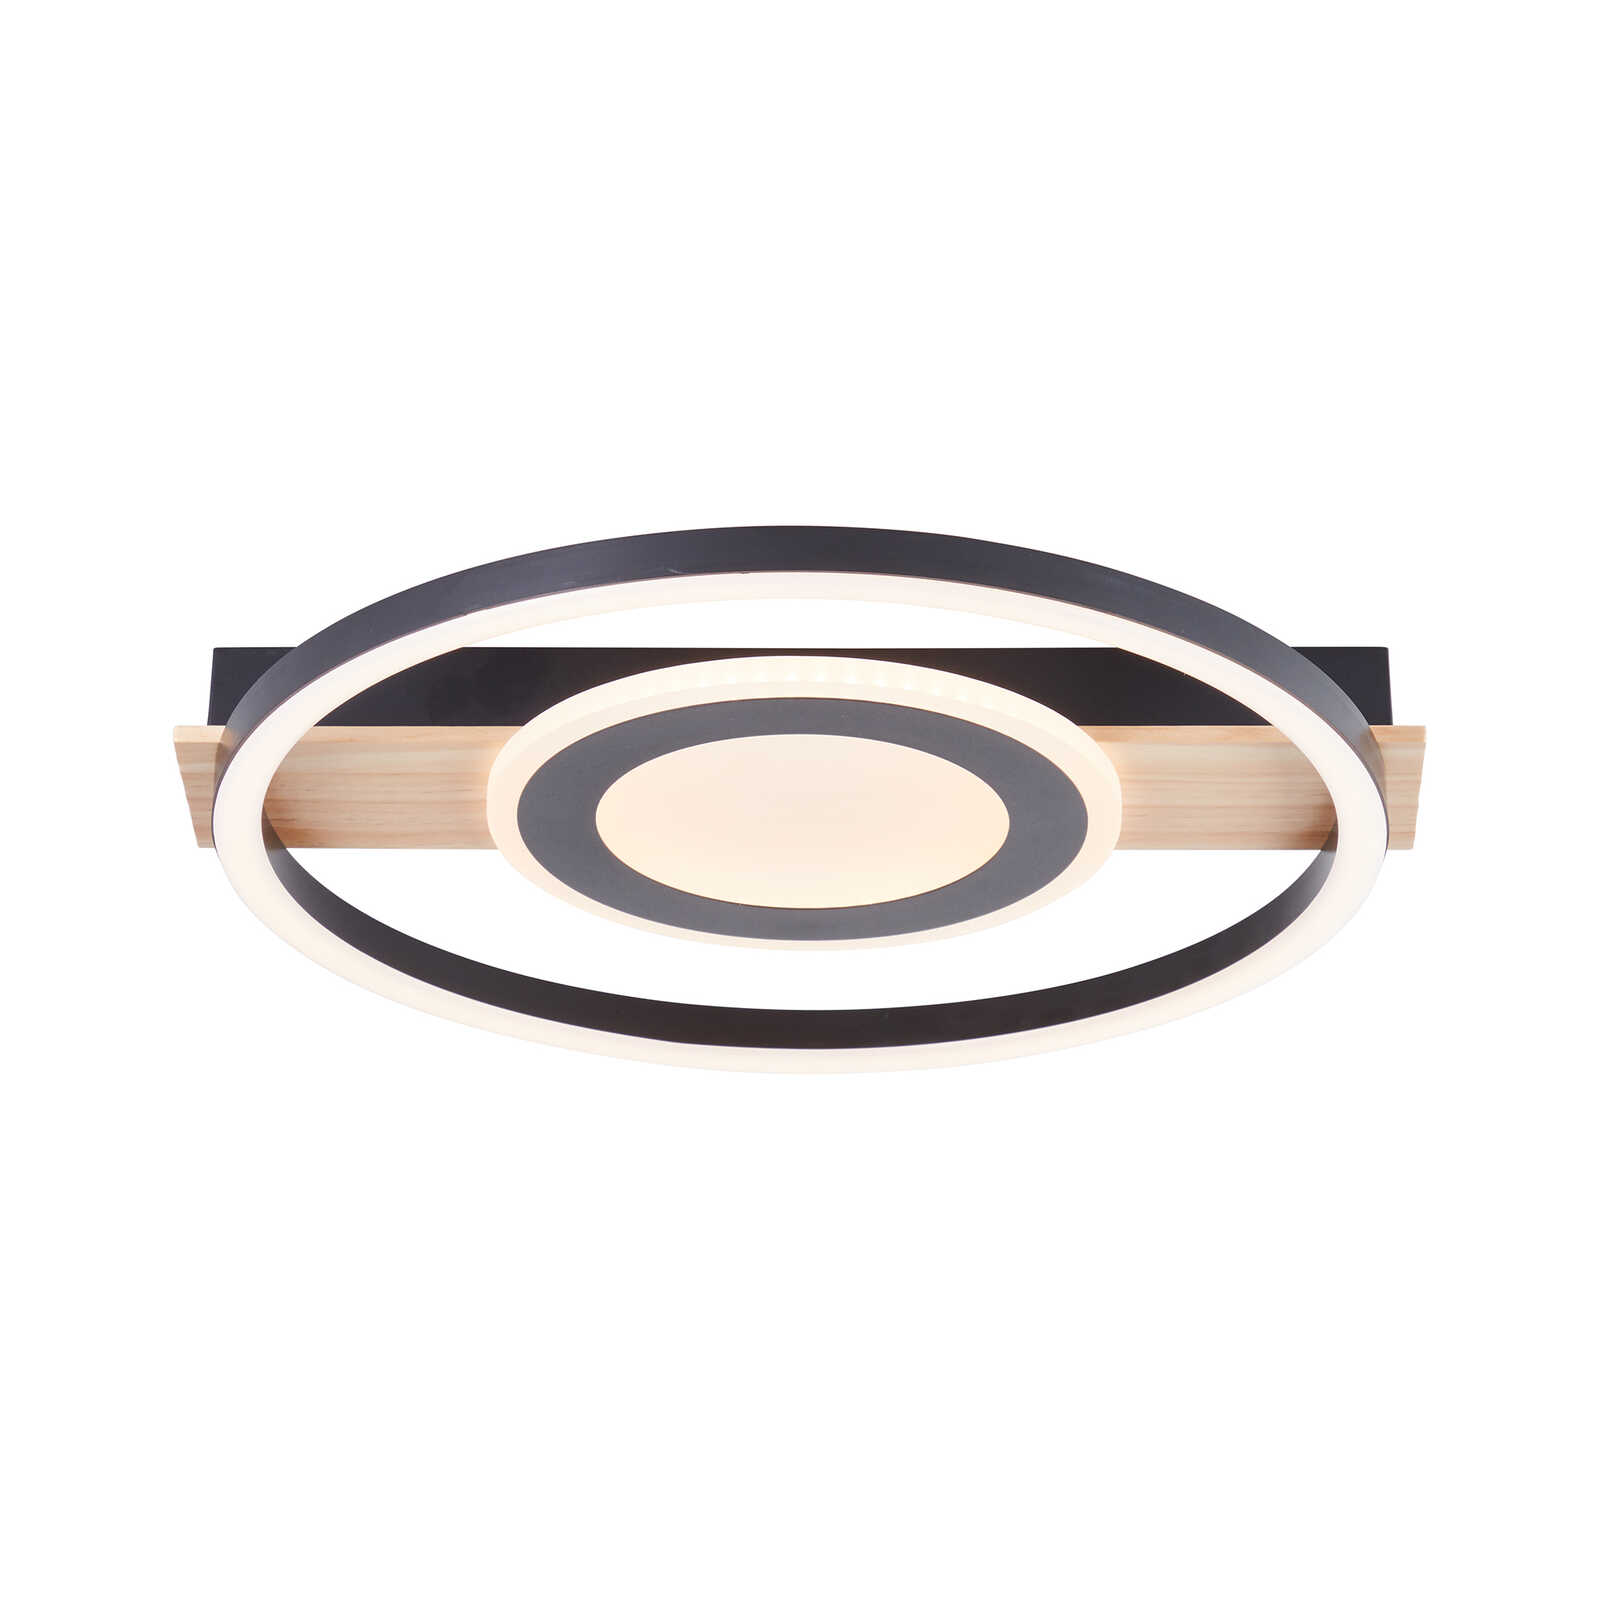 Wooden ceiling light - Leopold 2 - Brown
